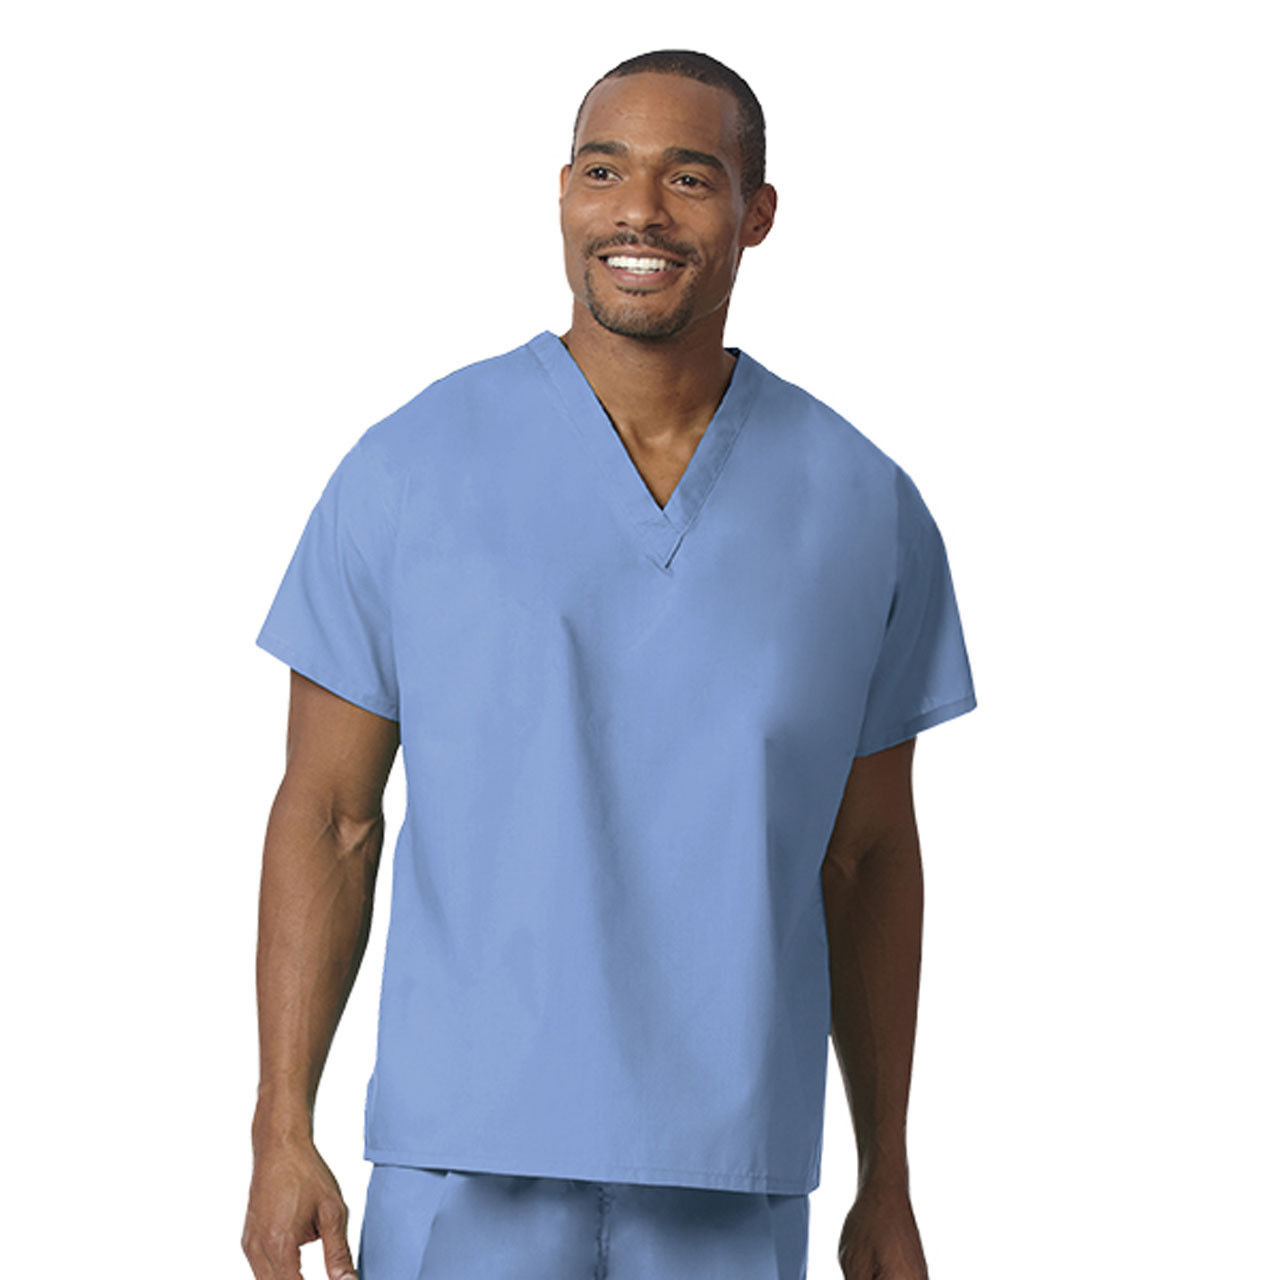 What features does the bottom of the blue surgical scrubs set possess?